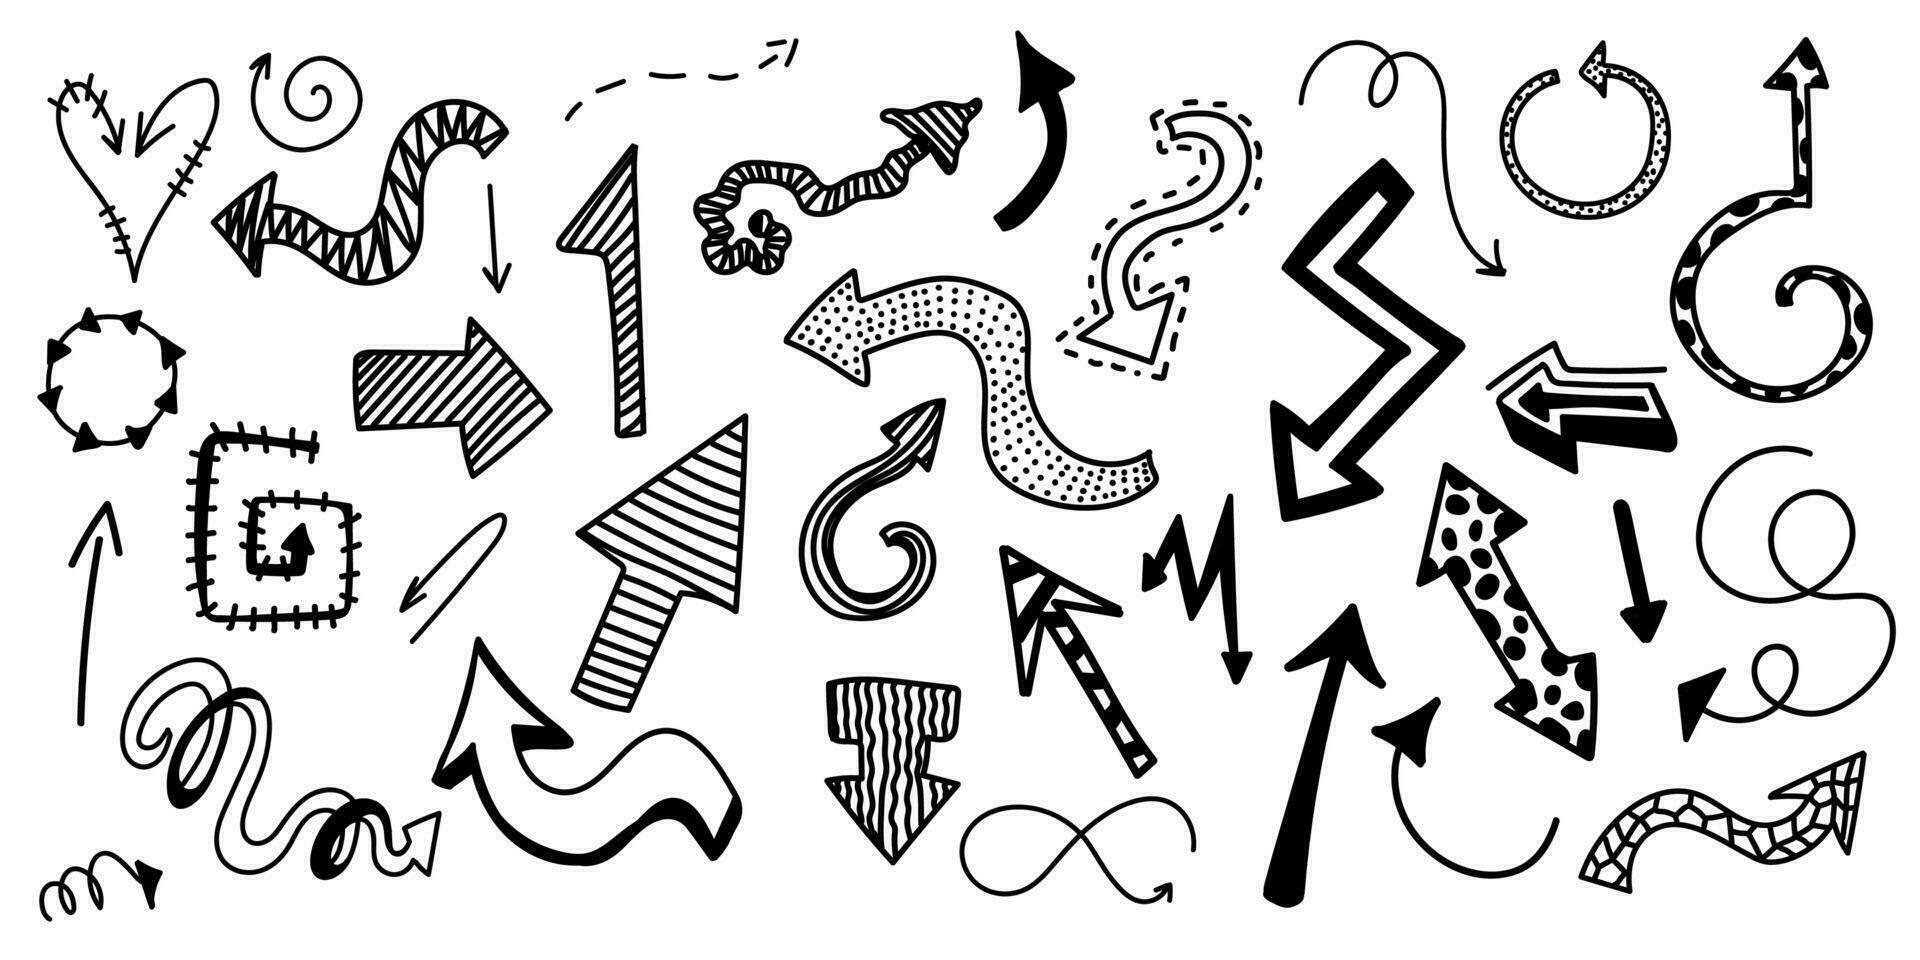 Charcoal arrows vector icons set. Hand drawn freehand different curved lines, swirls arrows. Doodle arrow illustration. Vector.